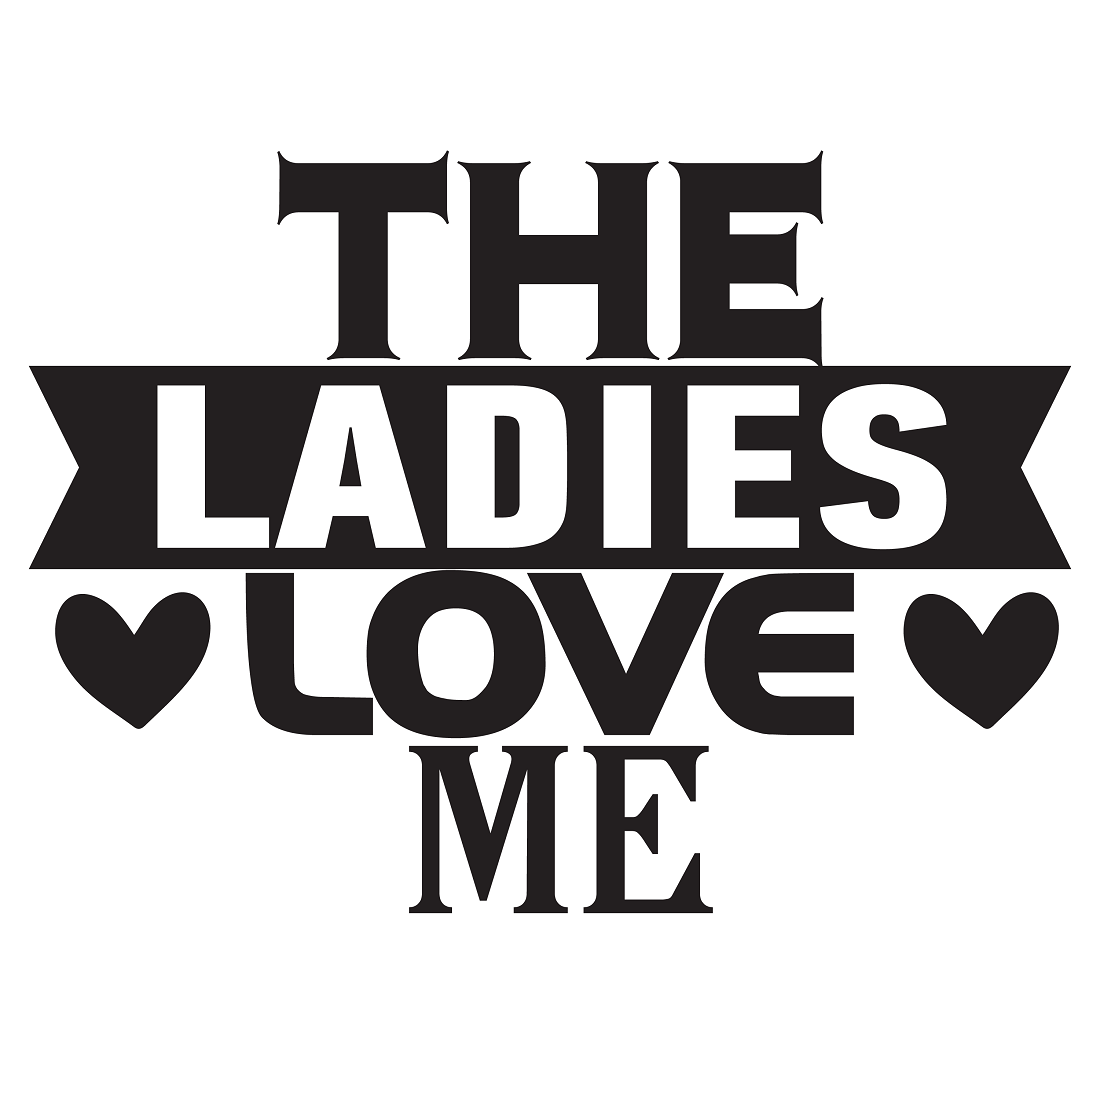 The ladies love me preview image.